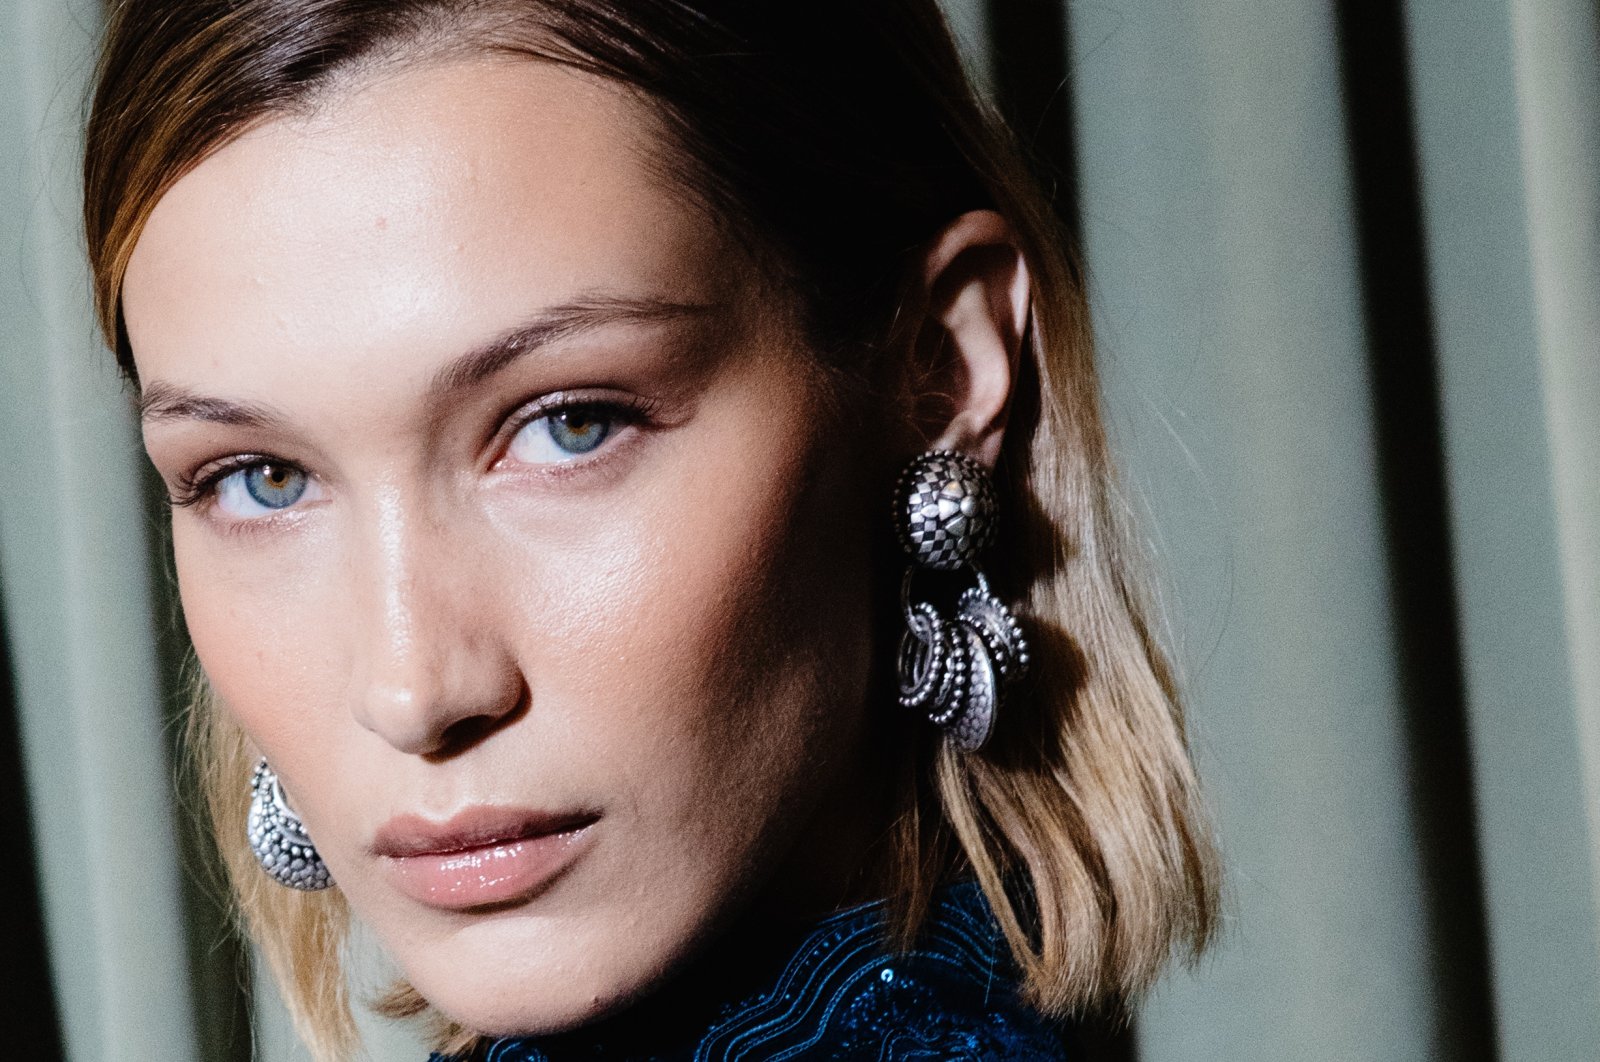 Bella Hadid poses backstage at the Etro fashion show during the Milan Fashion Week Spring/Summer 2020 in Milan, Italy, Sept. 20, 2019. (Getty Images)